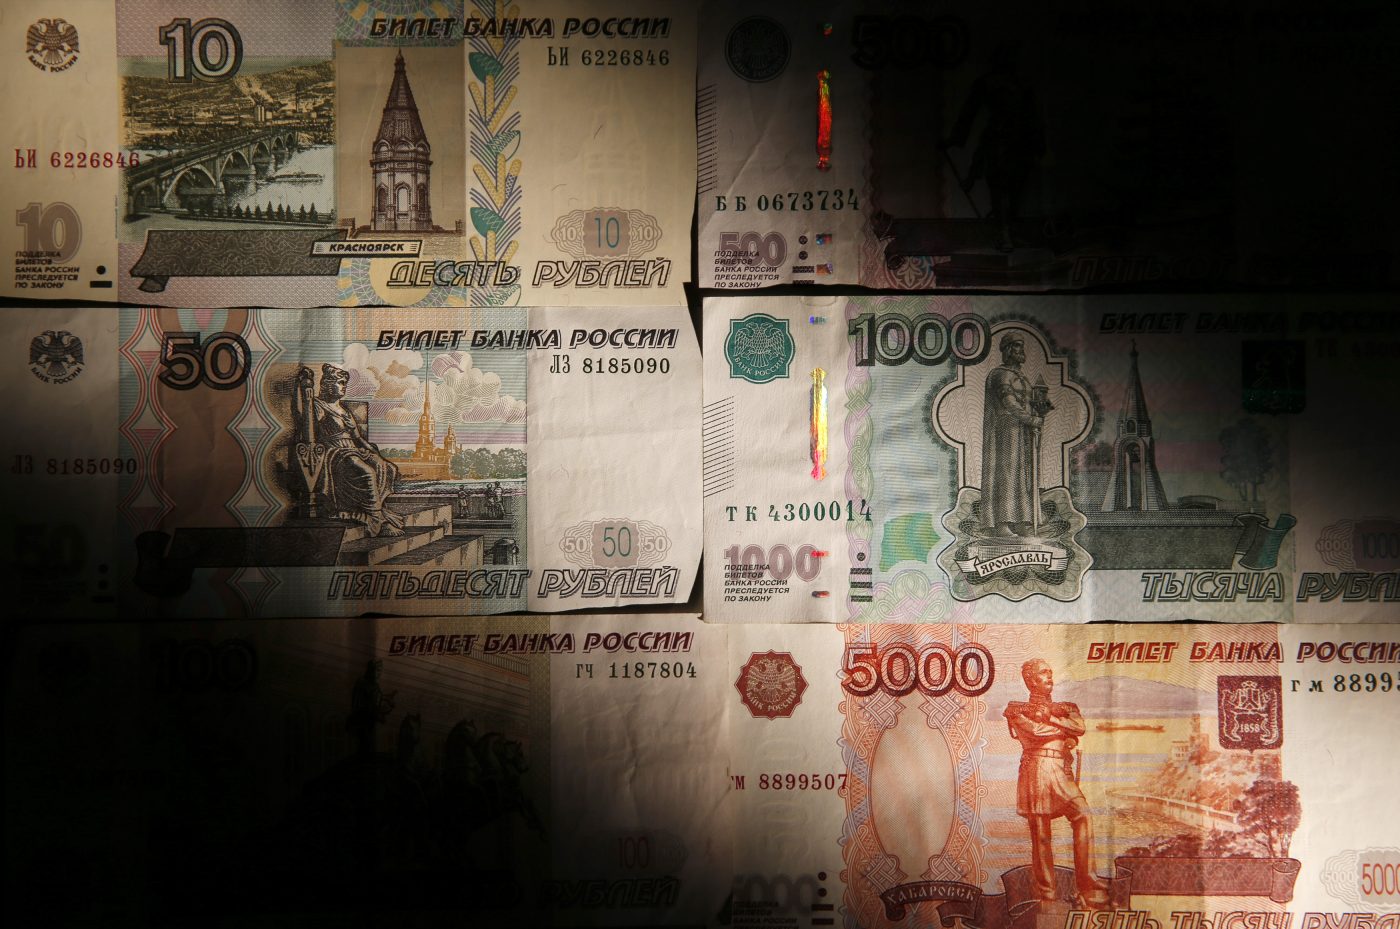 Photo: Russian rouble banknotes are seen in this illustration picture taken in Moscow, September 30, 2014. Russia's central bank said on Tuesday it did not plan to implement "any kind" of capital controls, after a news report saying the bank was considering such controls sent the rouble plunging to a new all-time against a dollar-euro basket. Picture taken September 30, 2014. Credit: REUTERS/Maxim Zmeyev RUSSIA - Tags: BUSINESS